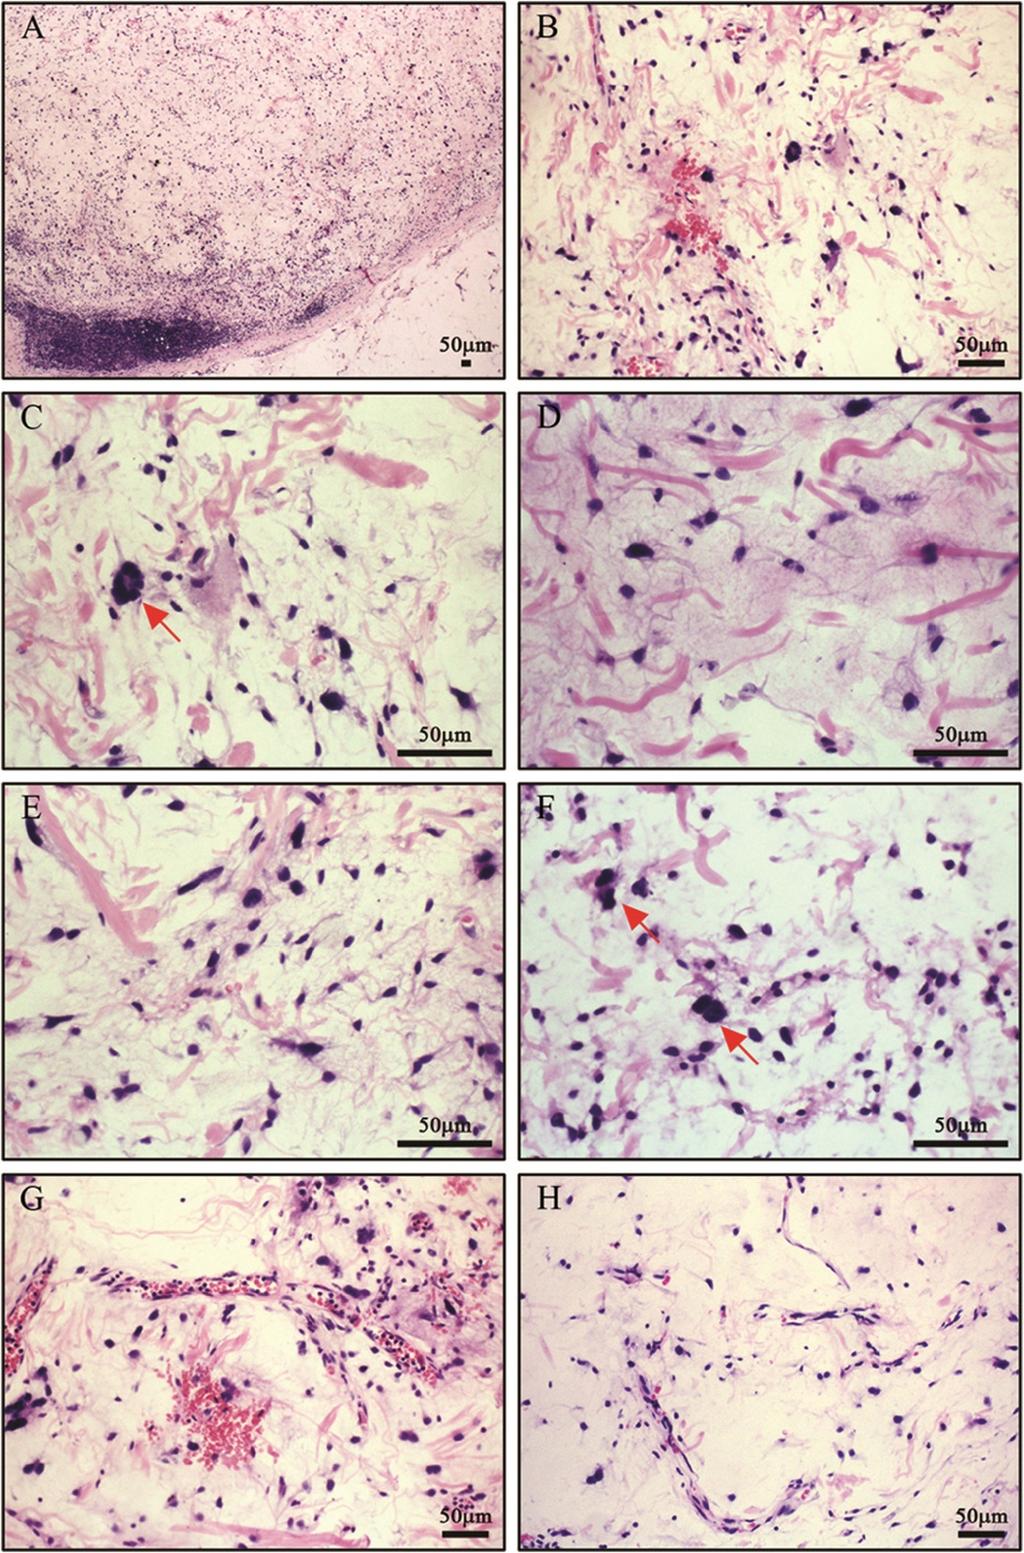 Wang et al. World Journal of Surgical Oncology 2013, 11:145 Page 3 of 5 Figure 1 Histological features. A) The tumor was demarcated from the surrounding tissues with a relatively clear boundary (40 ).